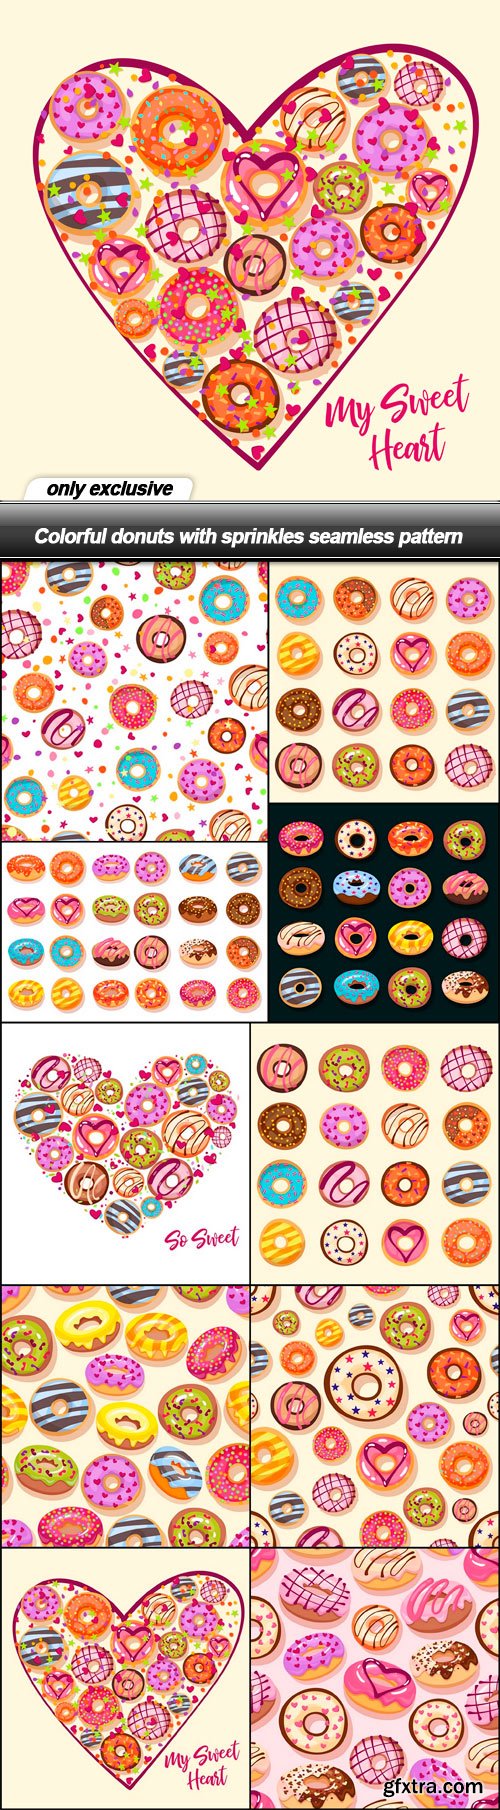 Colorful donuts with sprinkles seamless pattern - 10 EPS